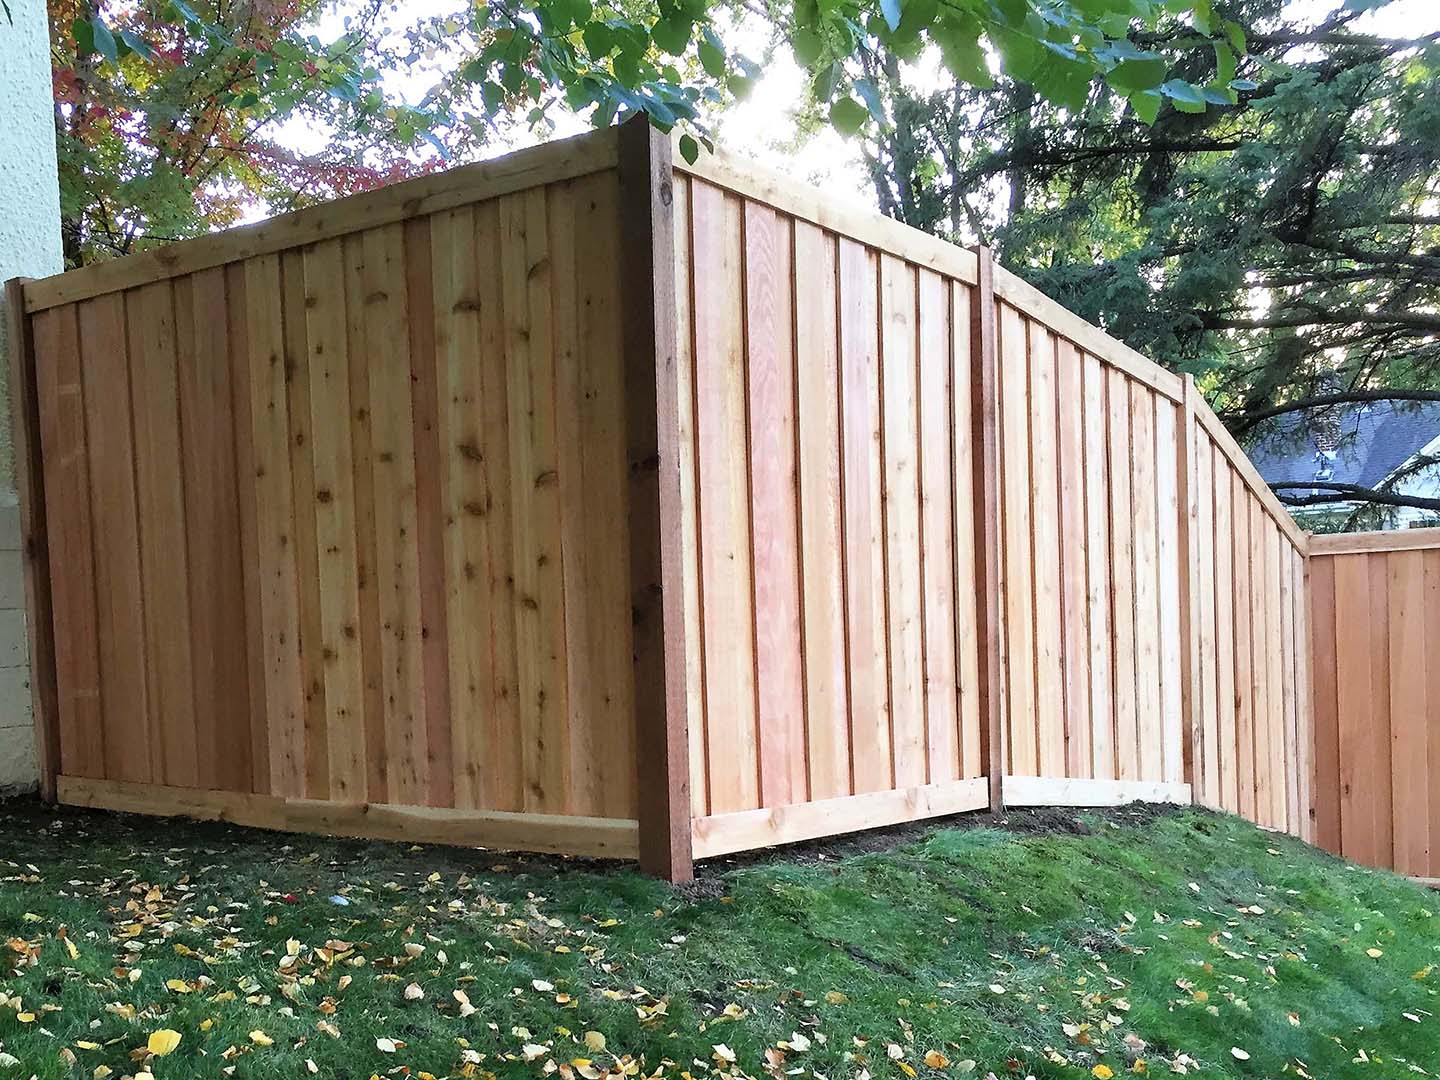 Minneapolis MN cap and trim style wood fence